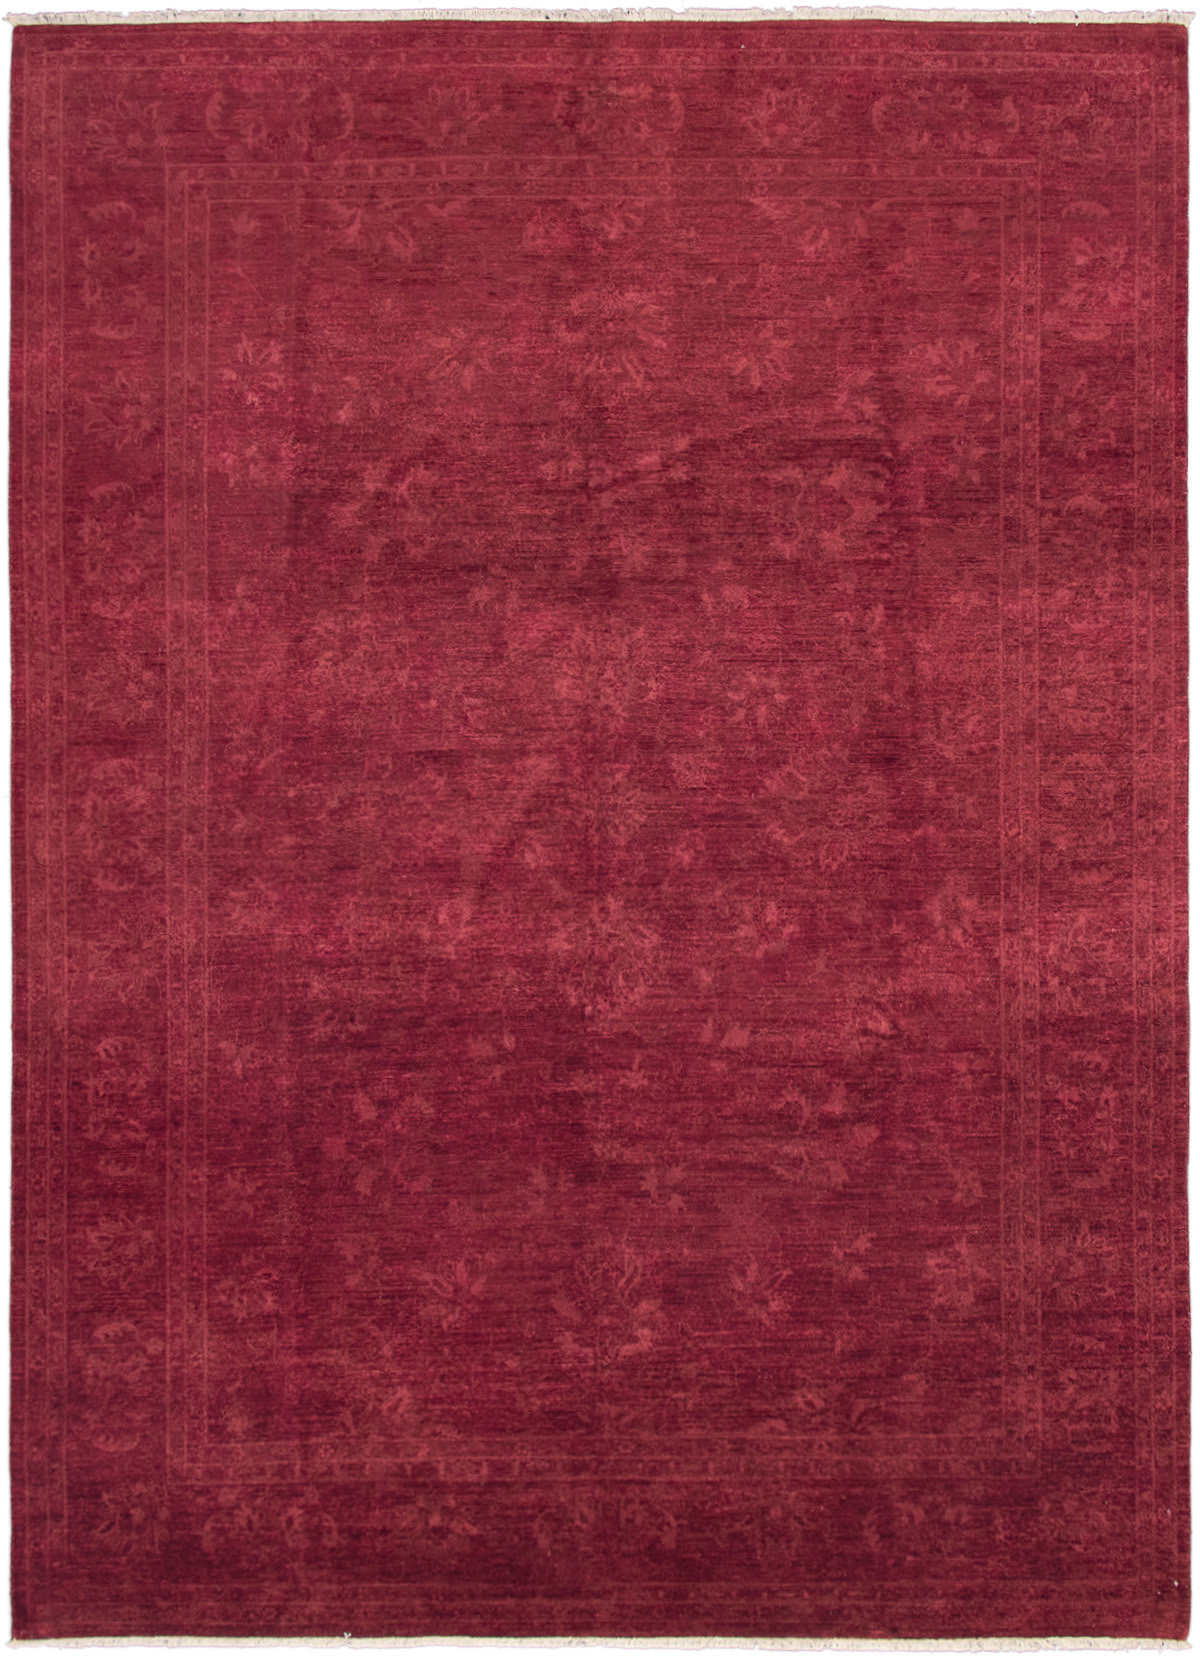 Hand-knotted Color transition Burgundy Wool Rug 10'0" x 13'10" Size: 10'0" x 13'10"  